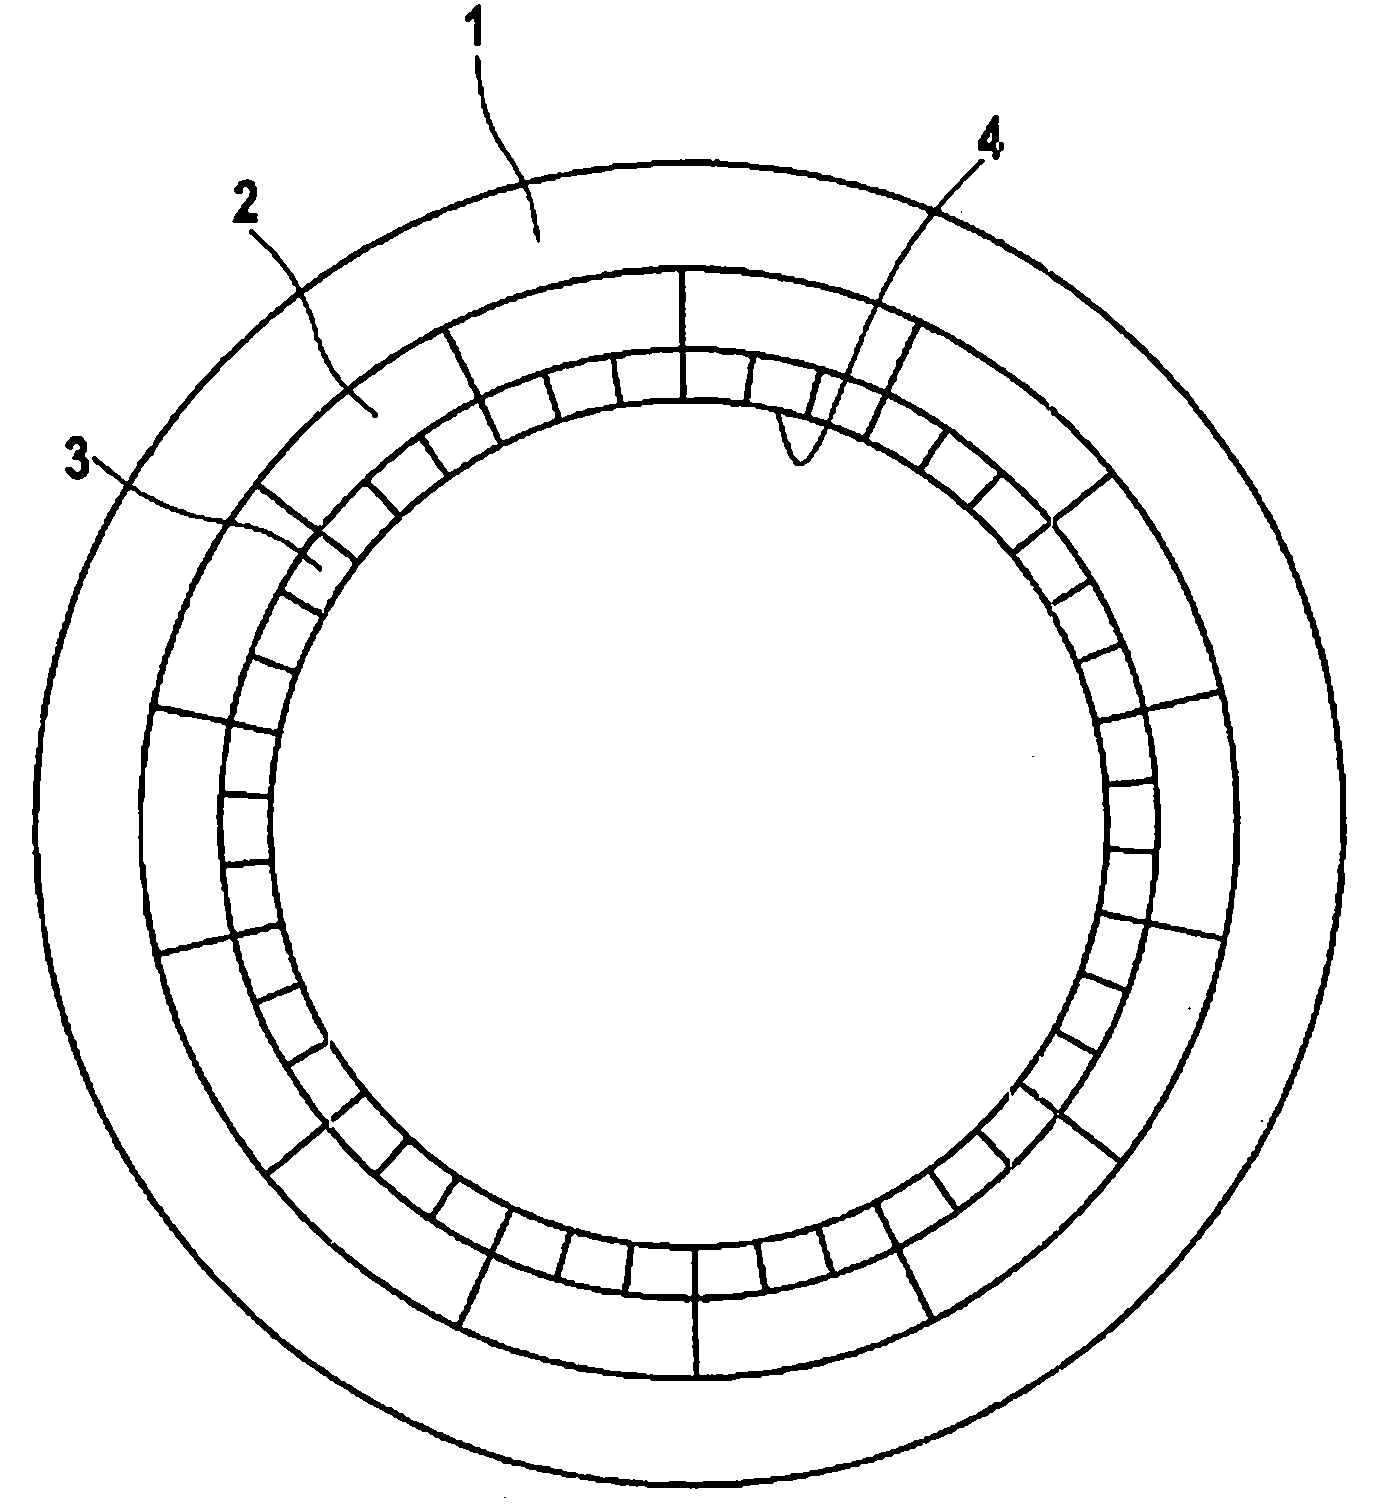 Method for producing a rotor/stator seal of a gas turbine